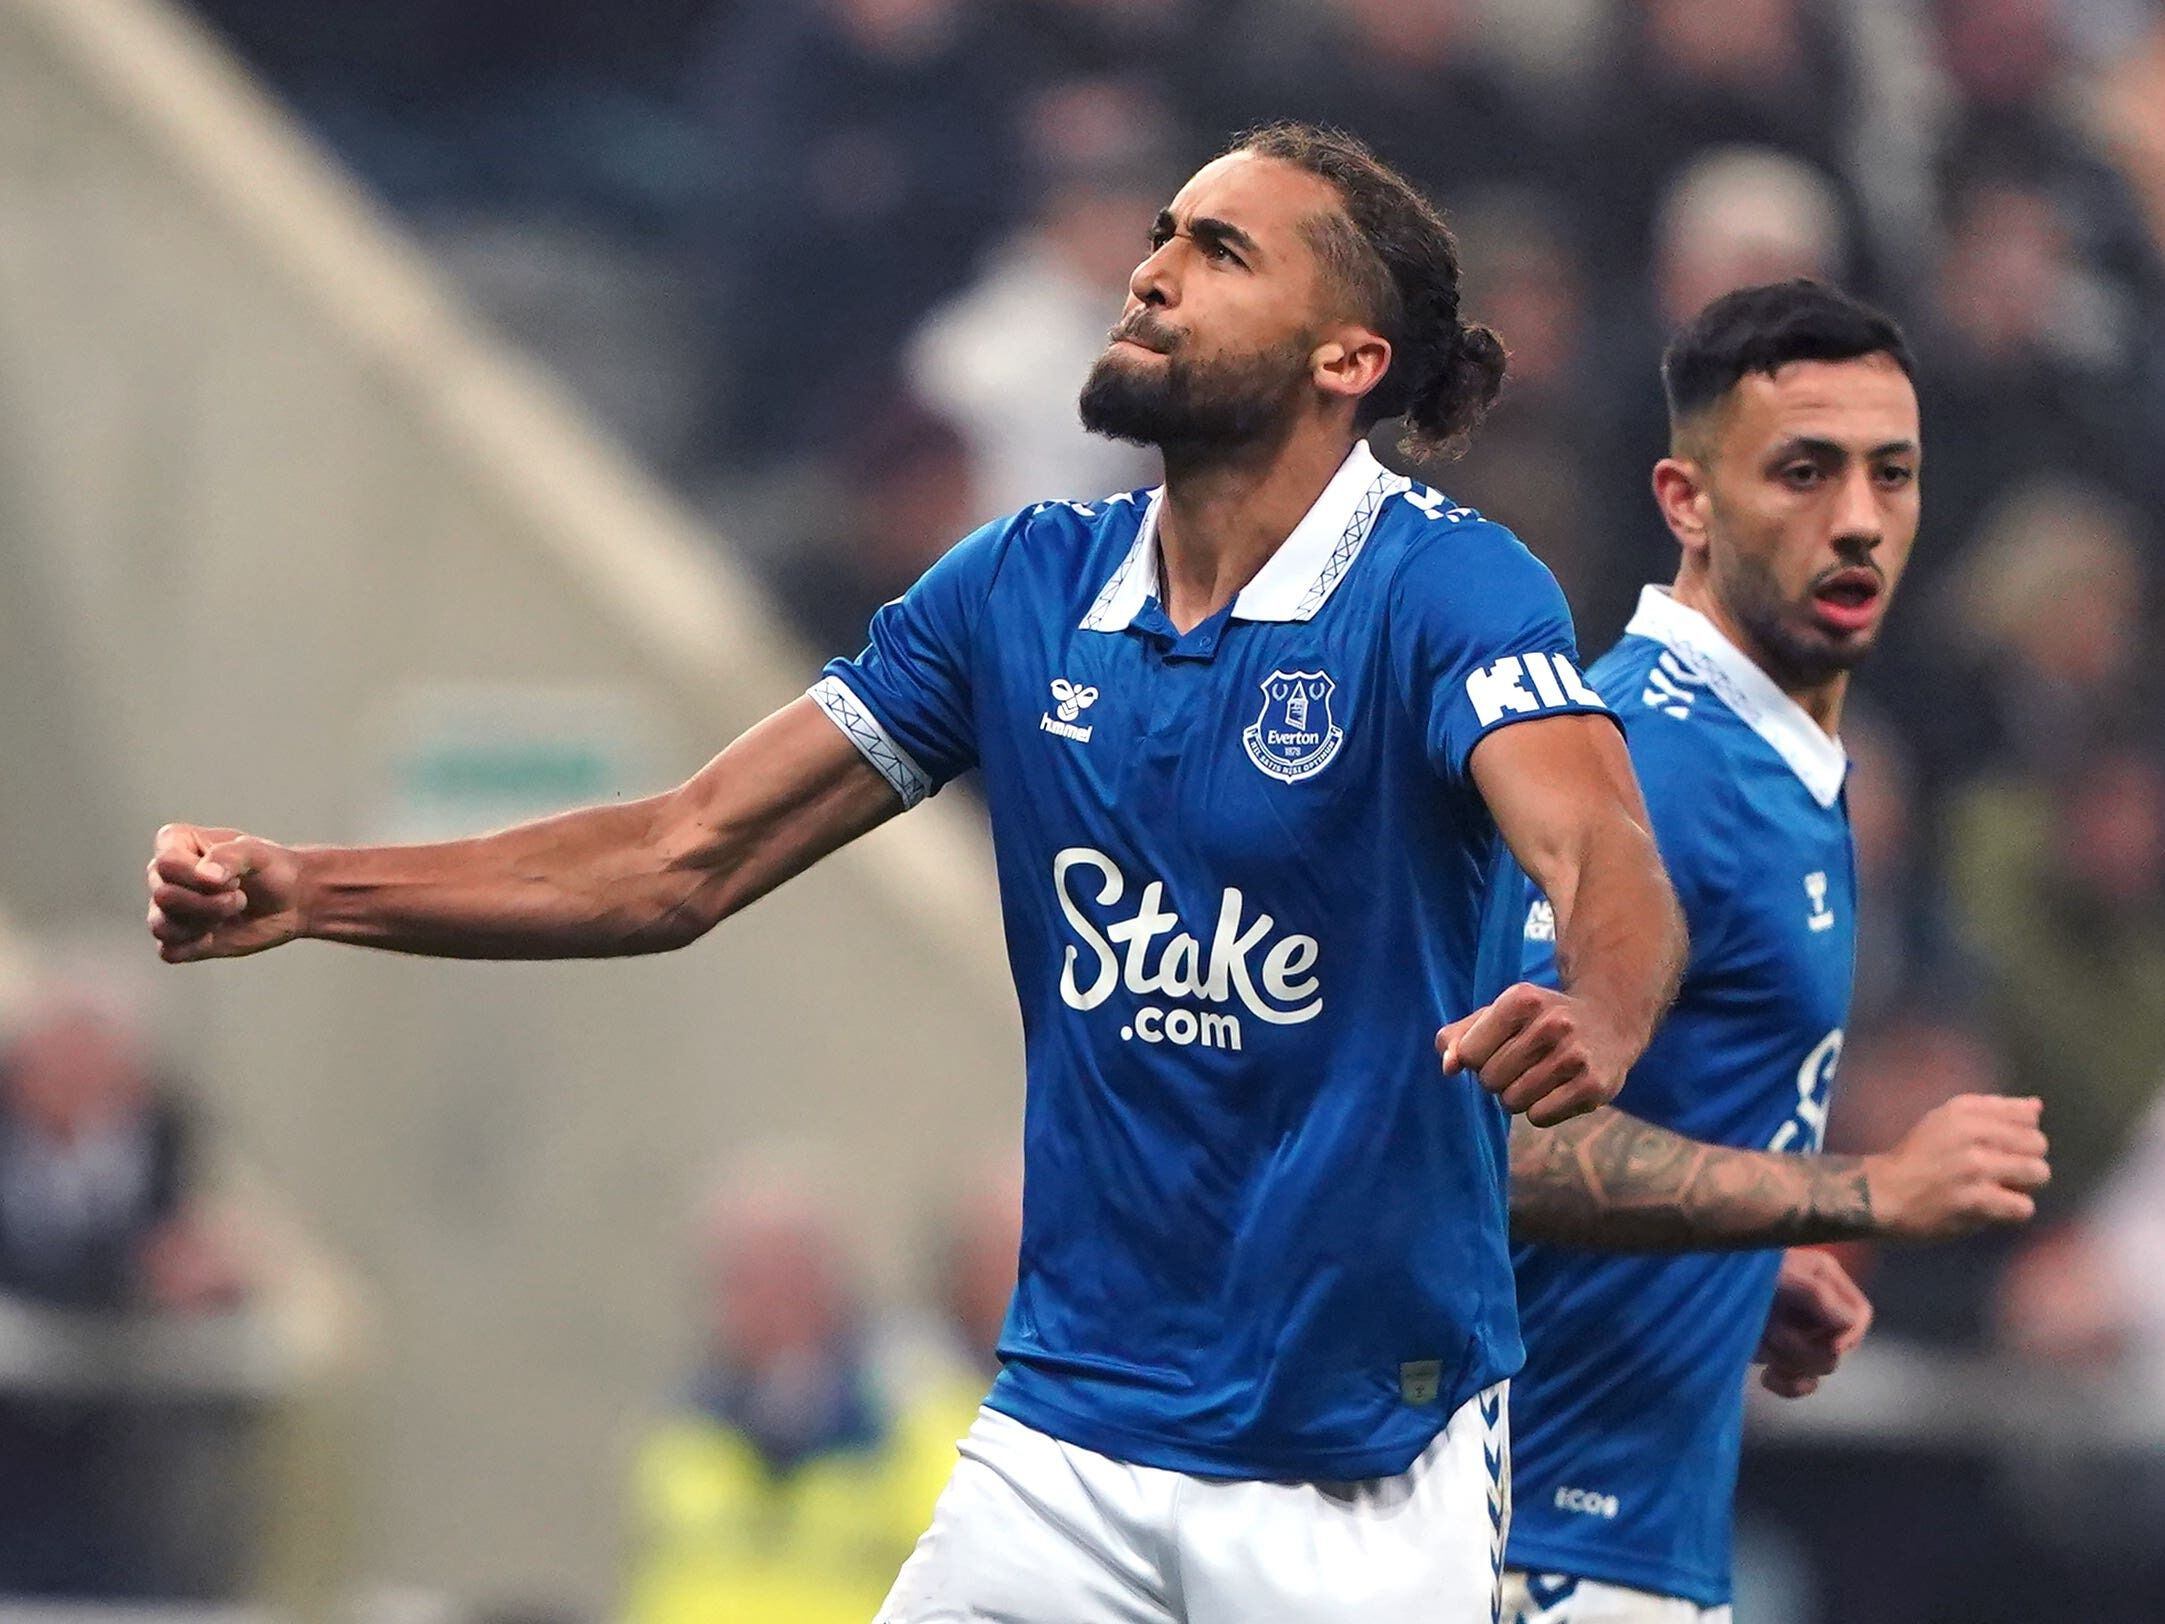 Dominic Calvert-Lewin ends goal drought to earn Everton a point at Newcastle